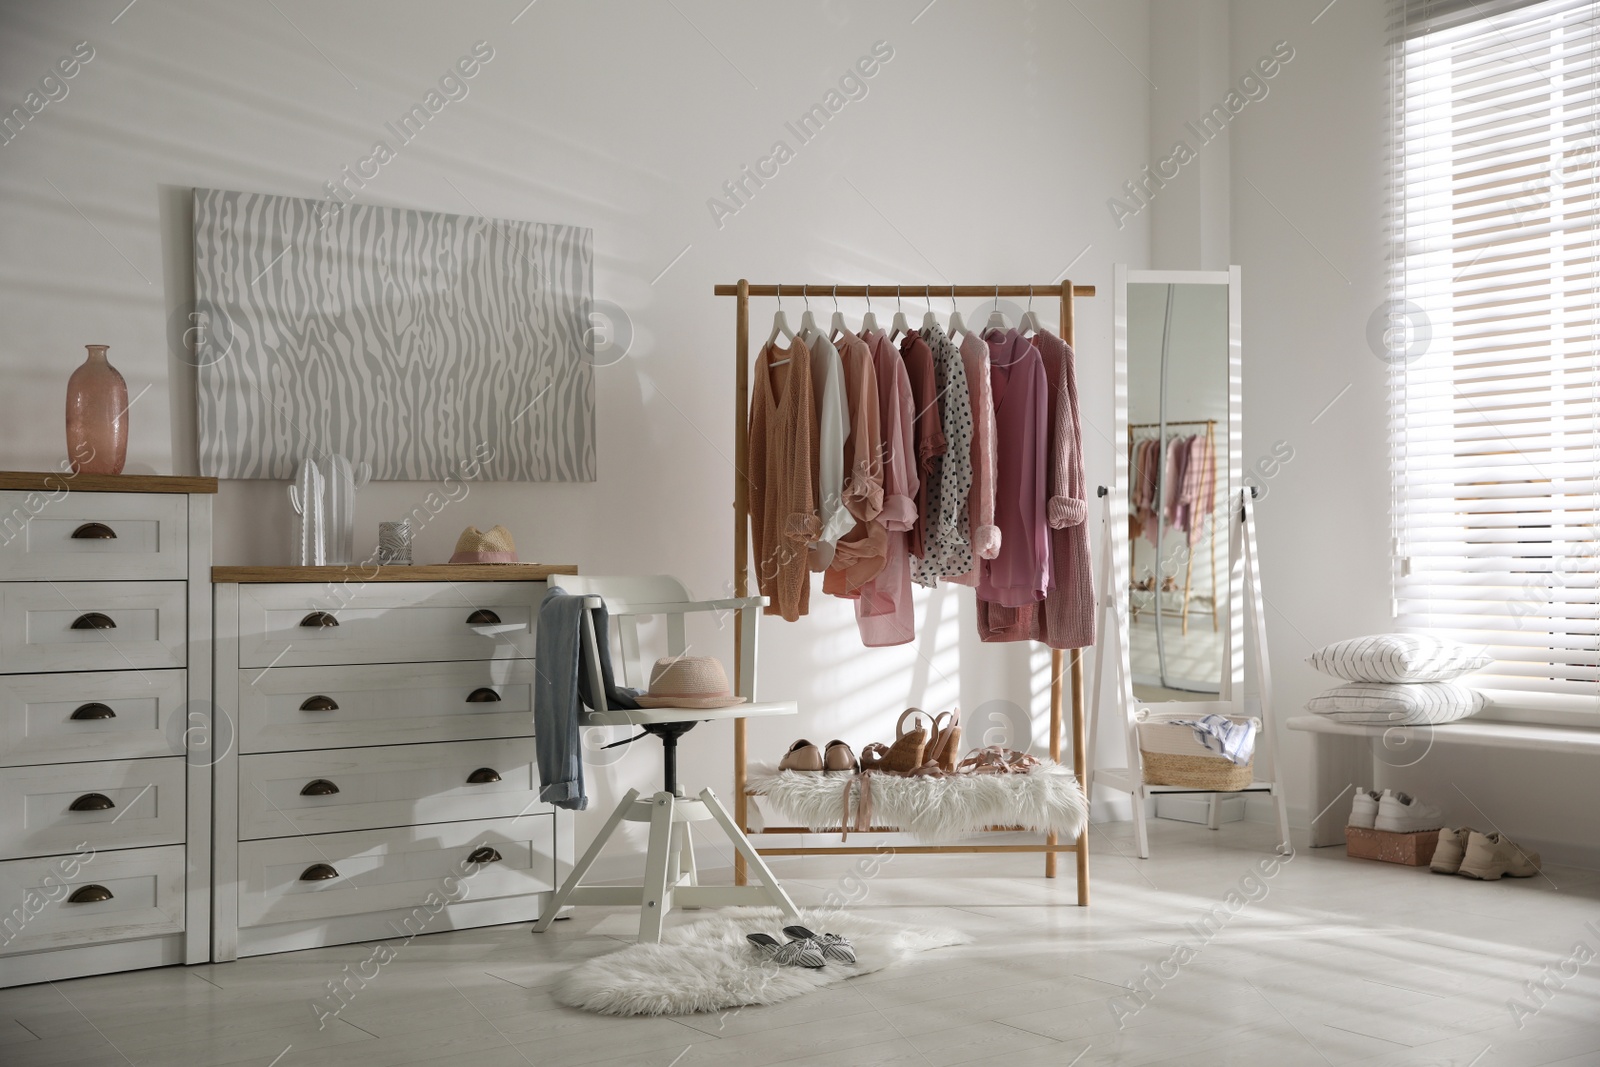 Photo of Rack with stylish women's clothes indoors. Interior design